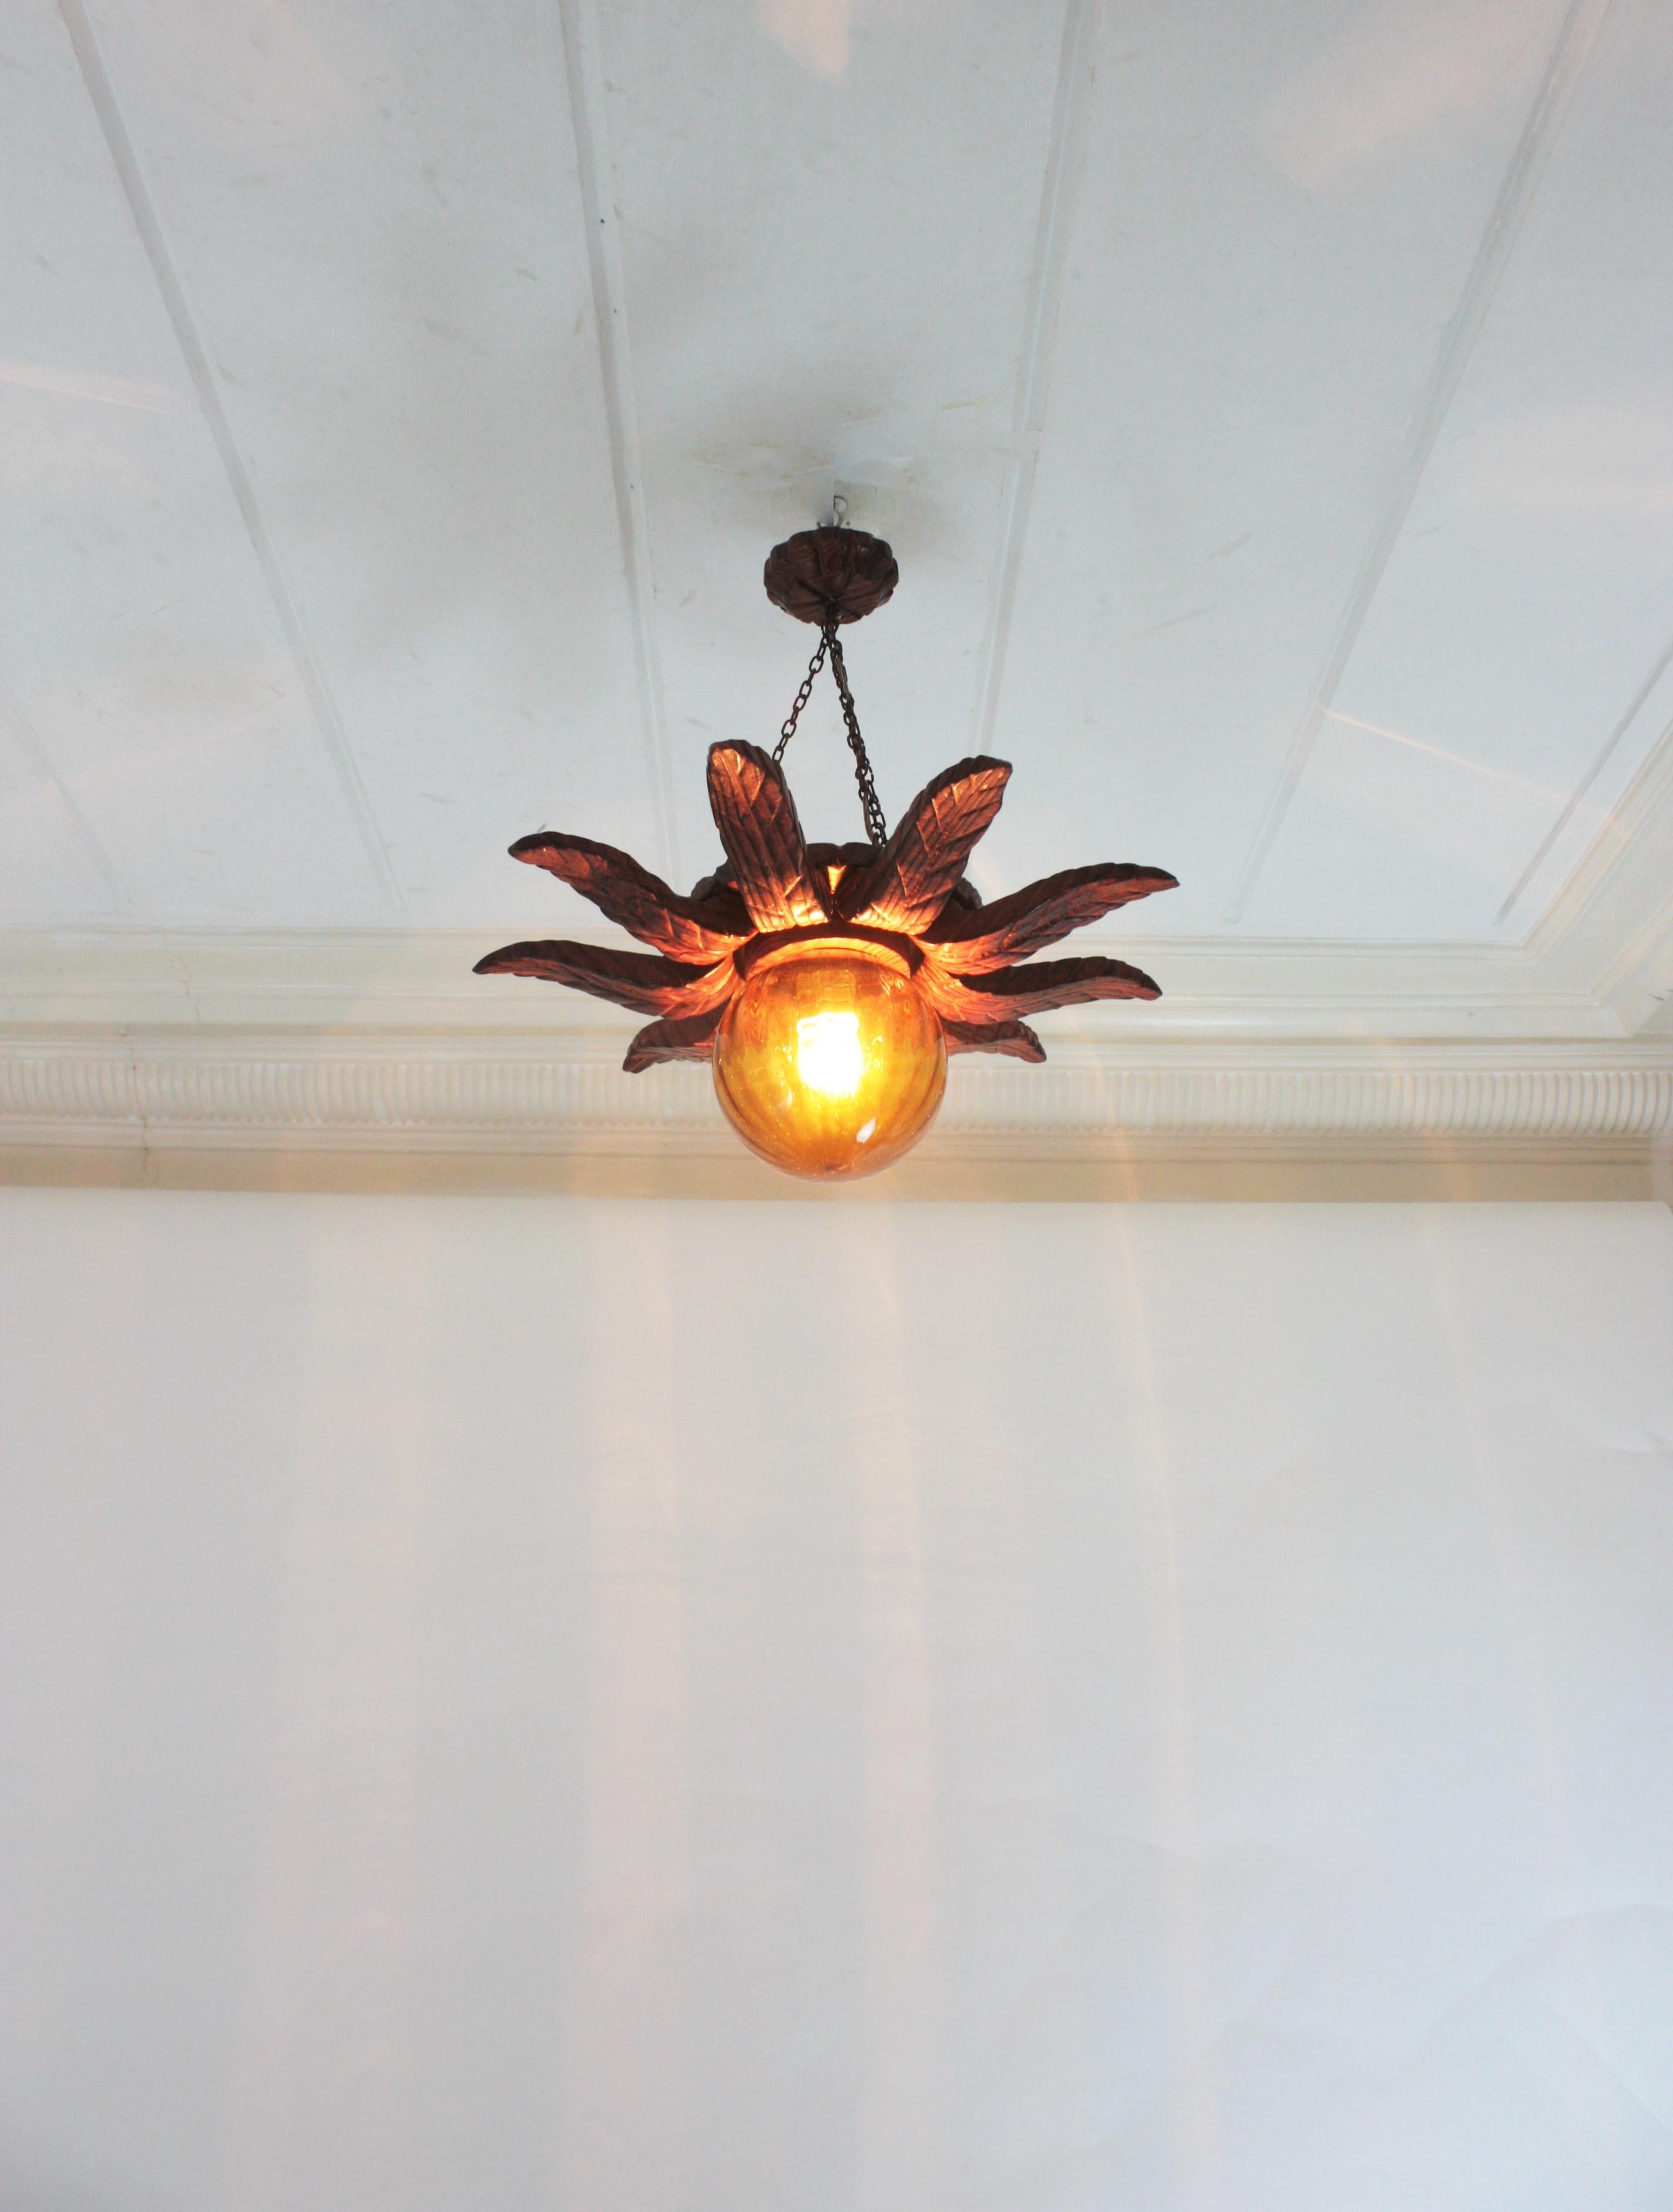 Spanish Colonial Sunburst Light Fixture in Carved Wood with Amber Glass Globe For Sale 9